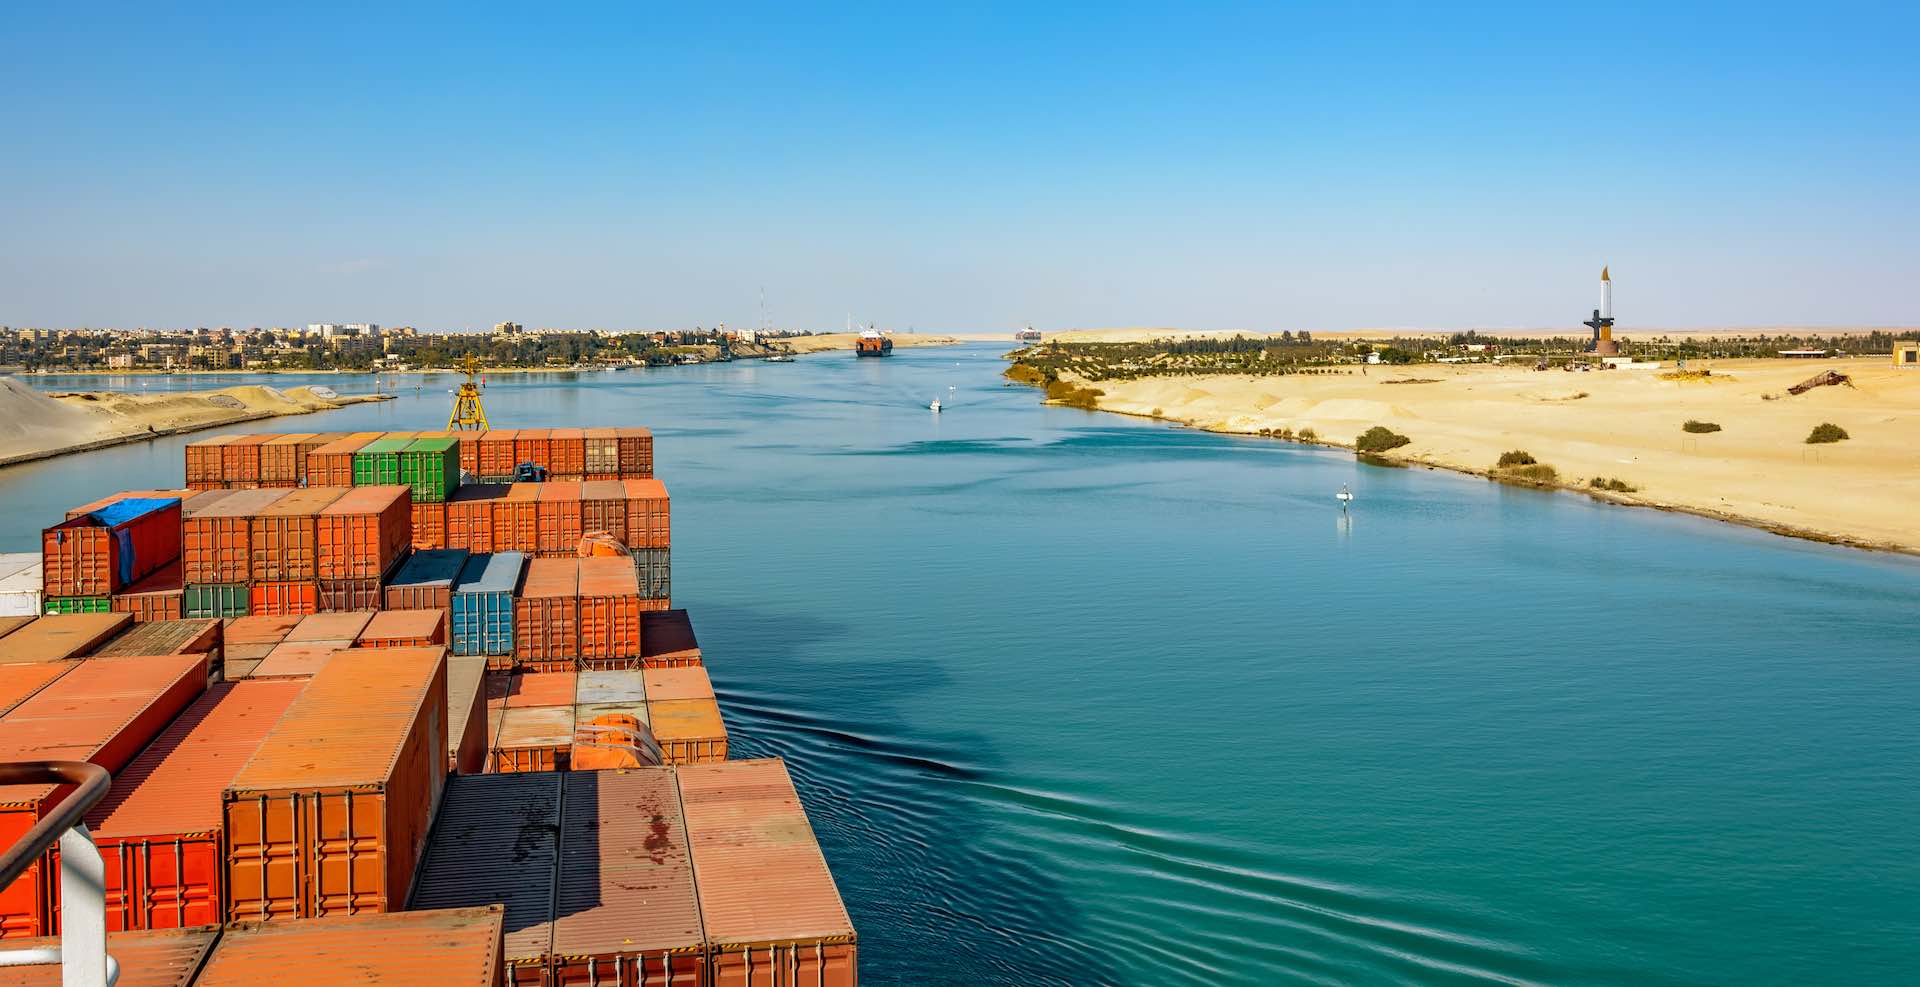 Suez Canal revenue hits highest record at 4 million in July 2022